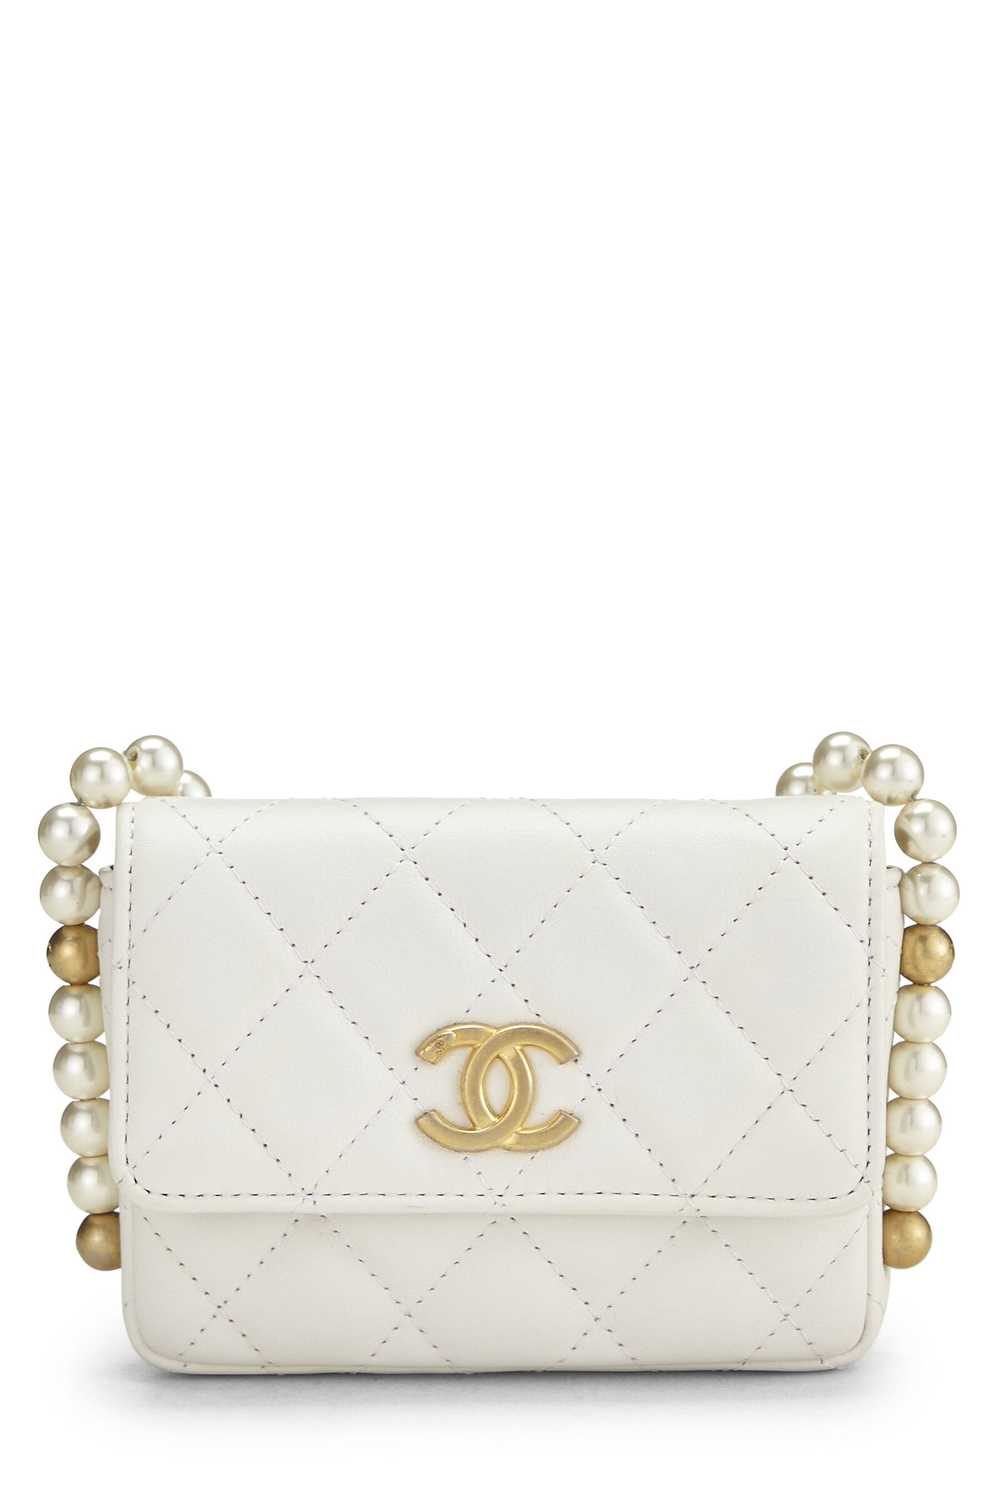 White Calfskin About Pearls Card Holder With Chain - image 1